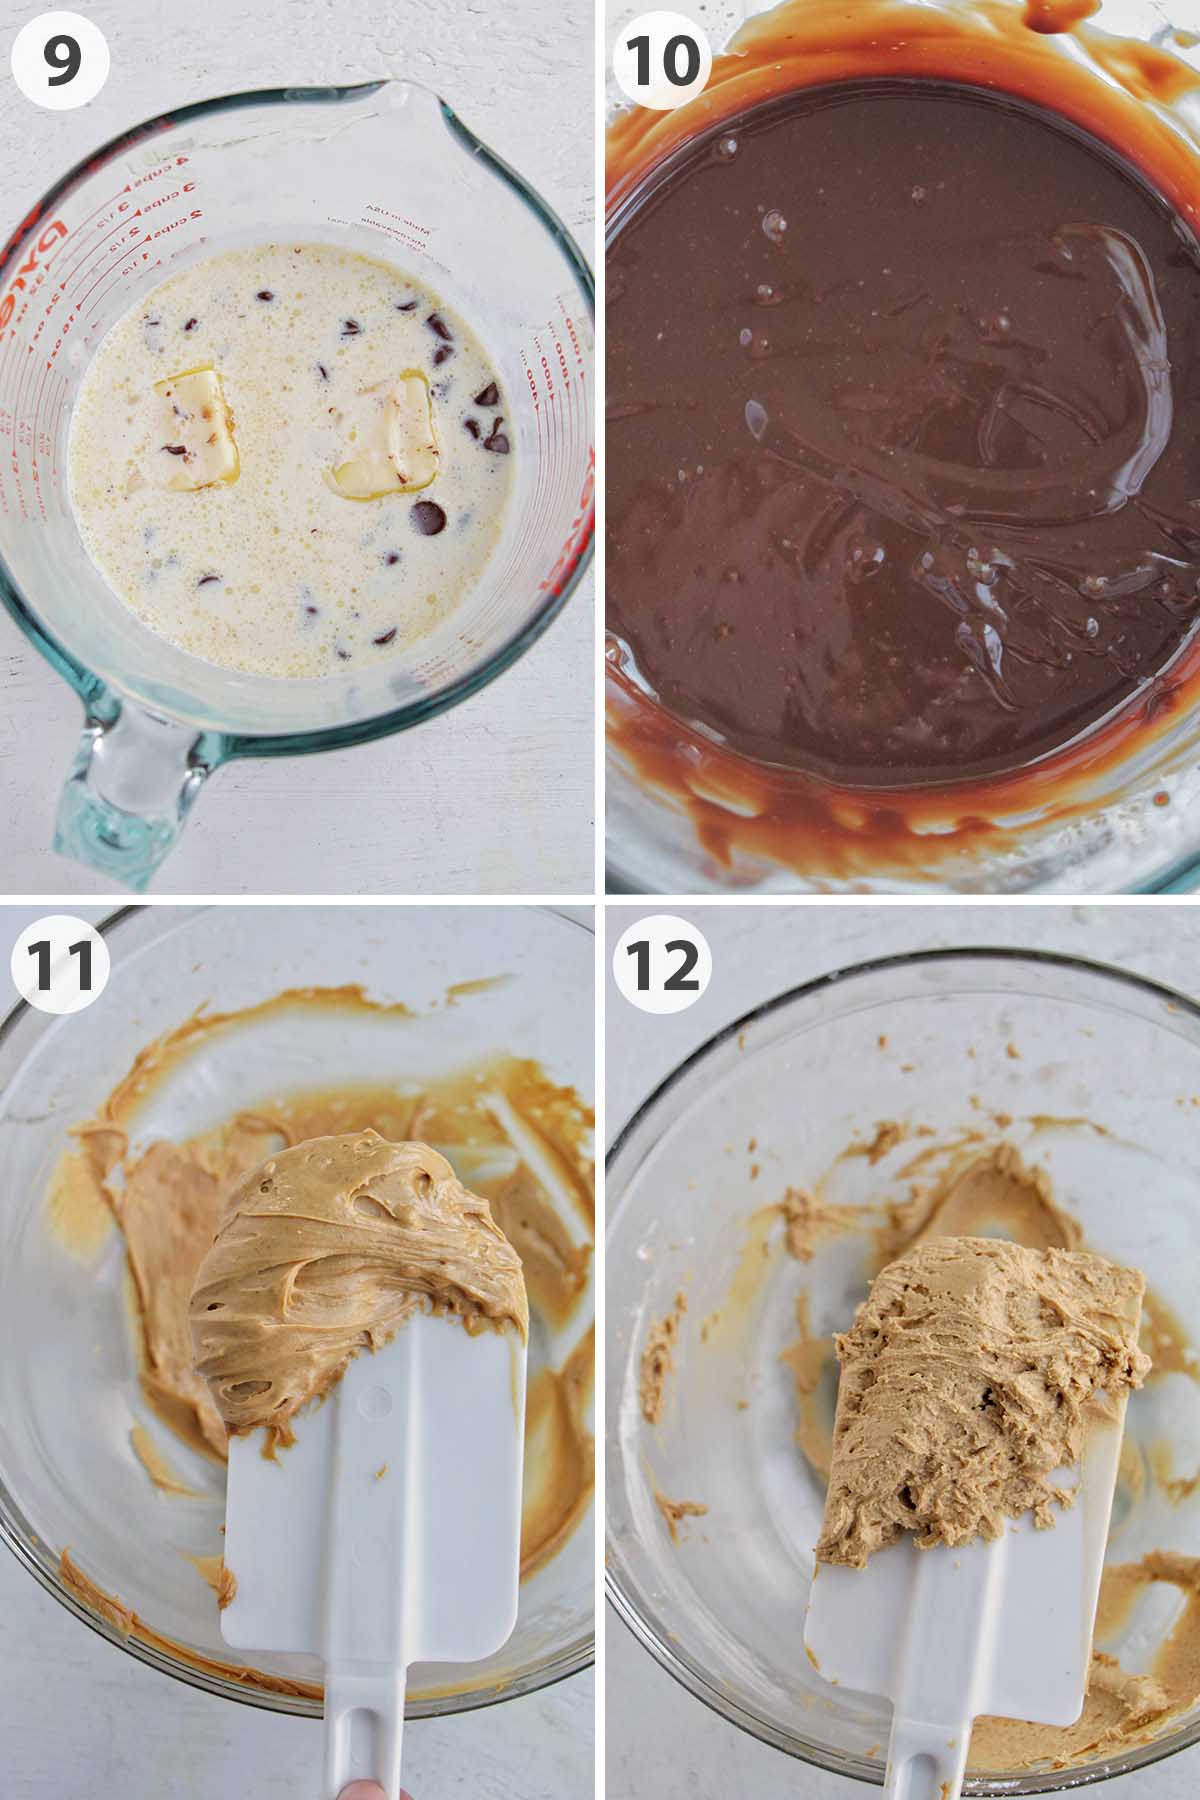 four numbered photos showing how to make Reese's egg macaron filling.